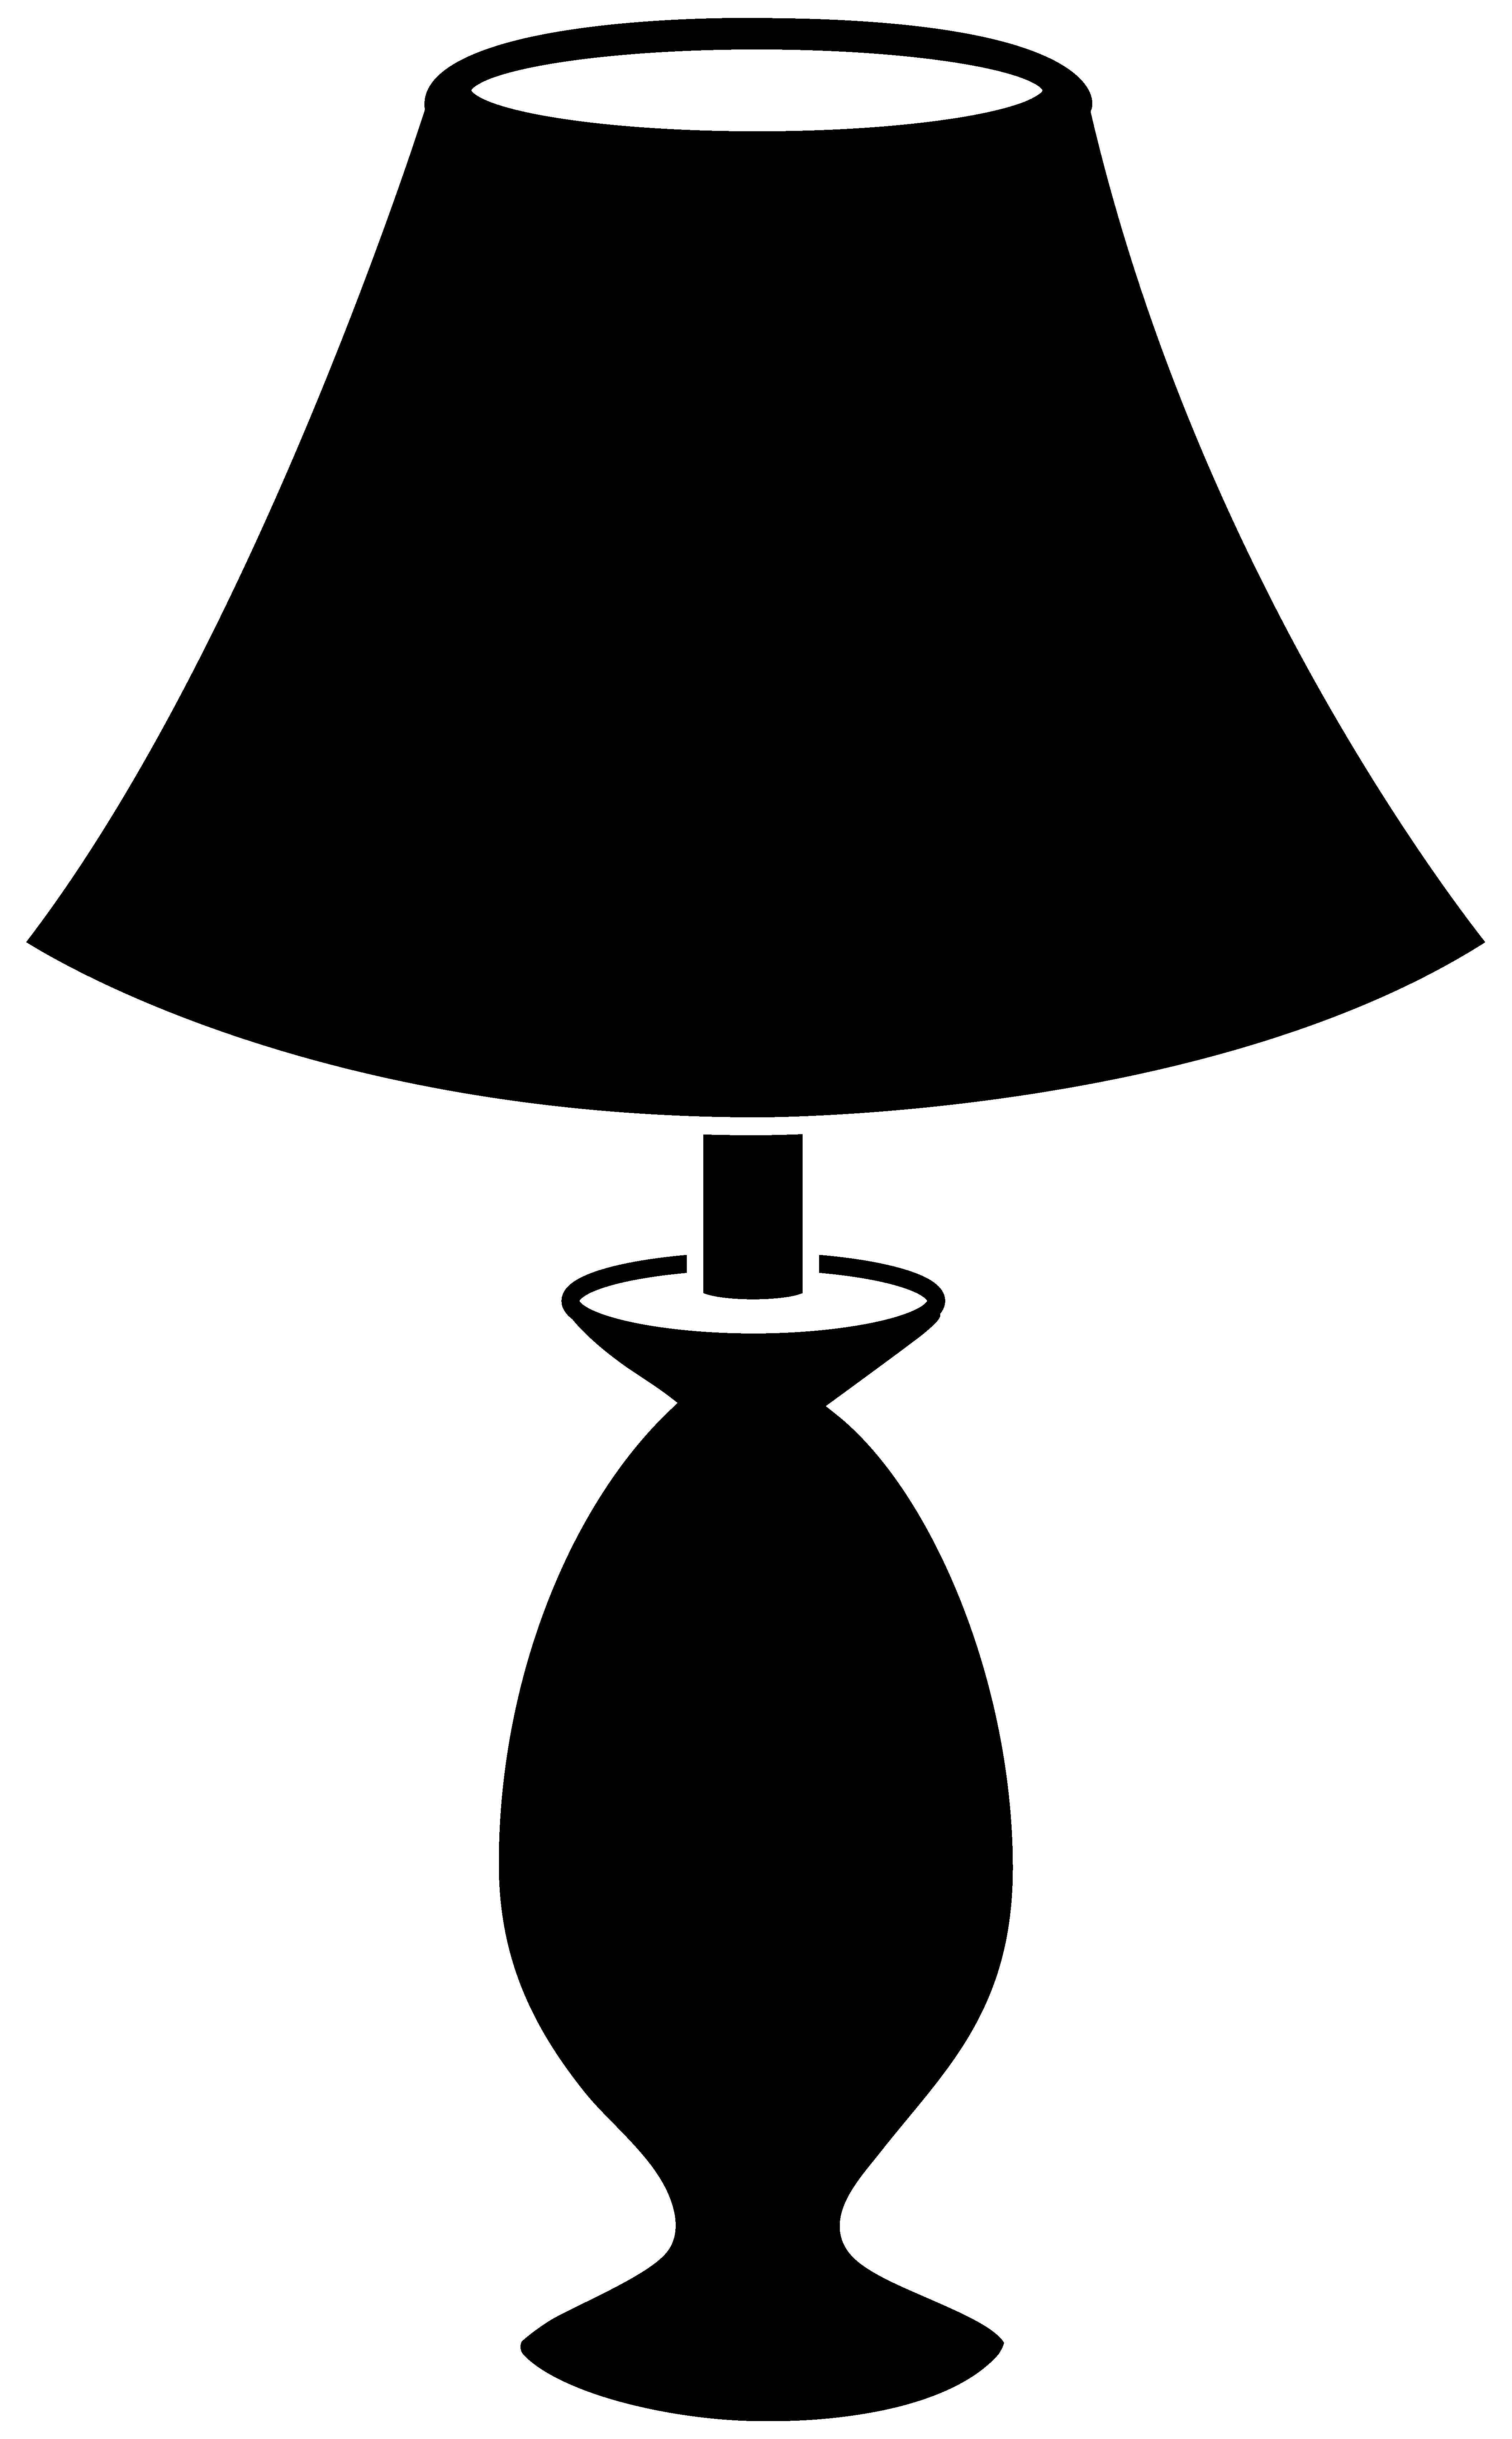 lamp clipart black and white - Lamp Clip Art